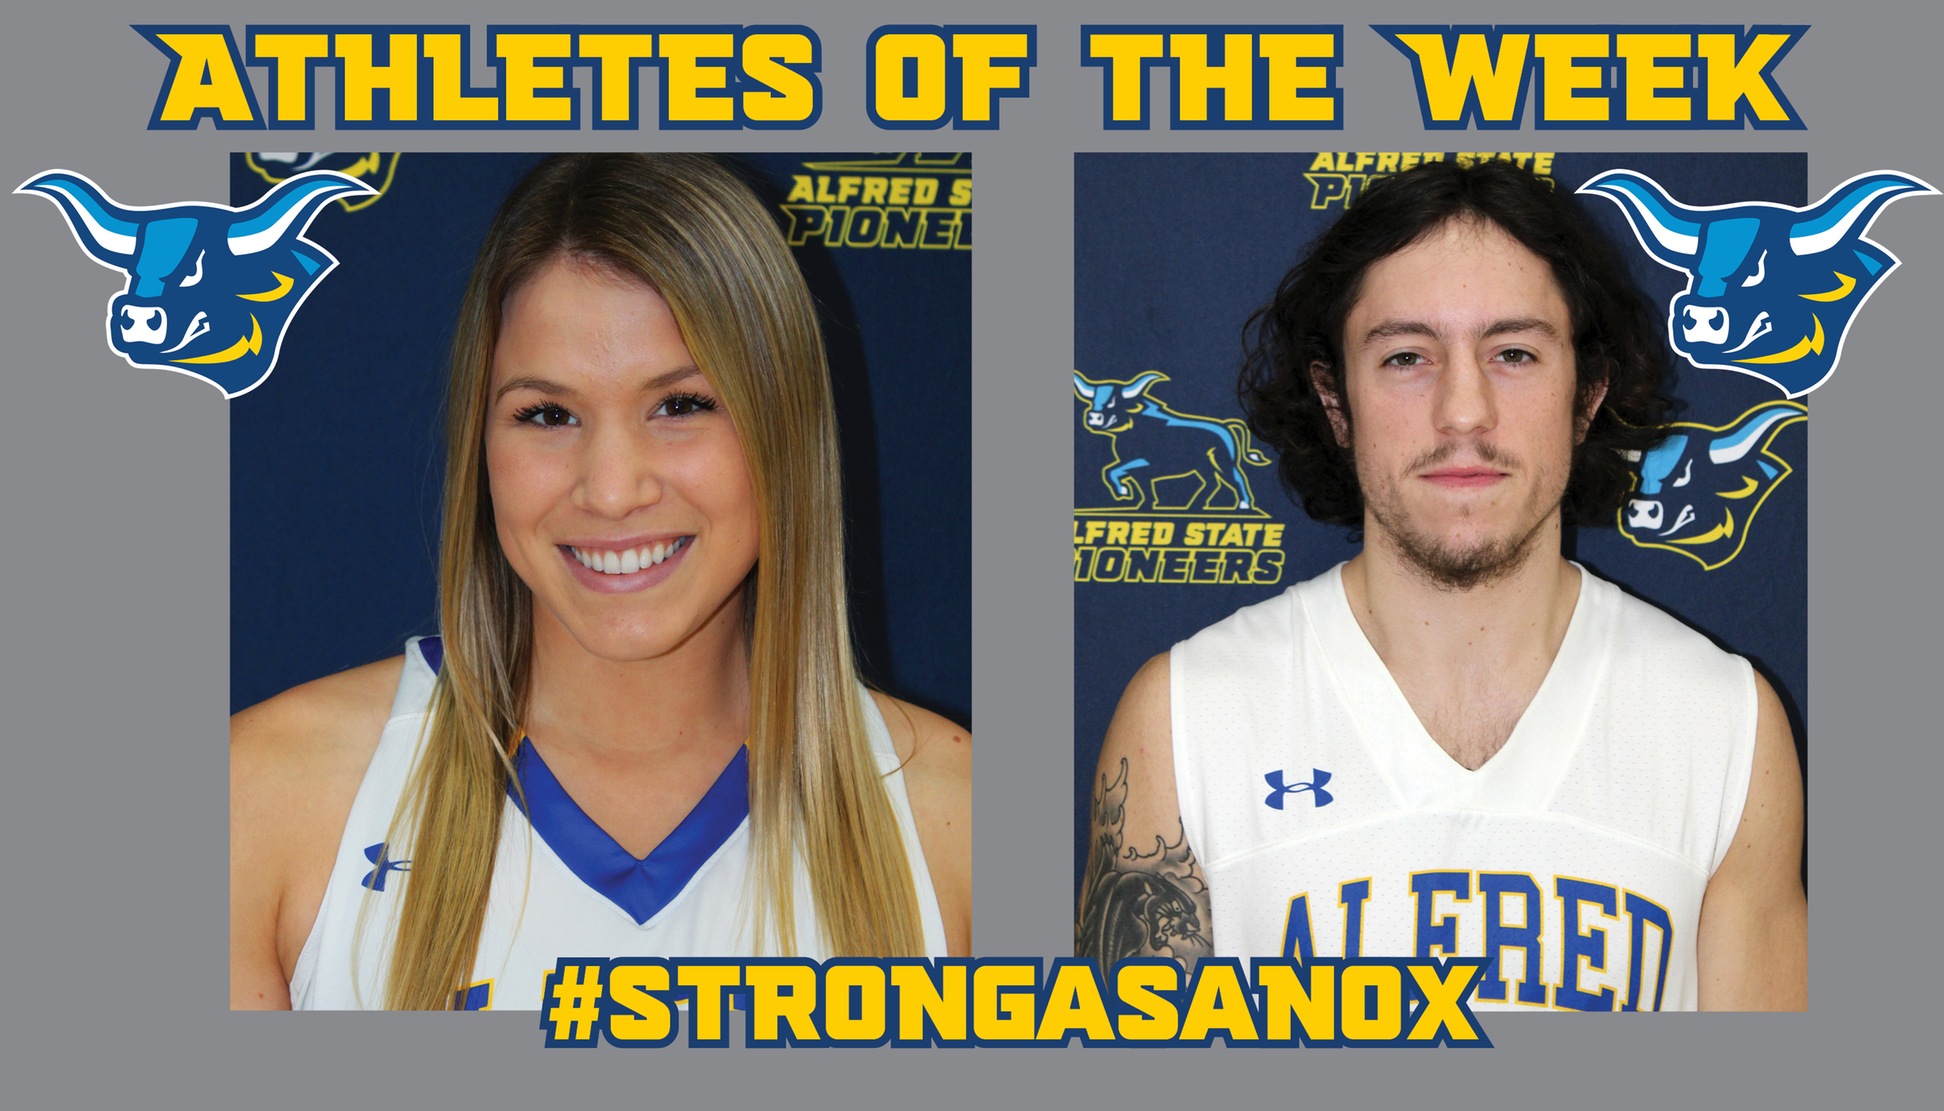 Jordyn Pettit and Ryan Gentile named Alfred State Athletes of the Week.